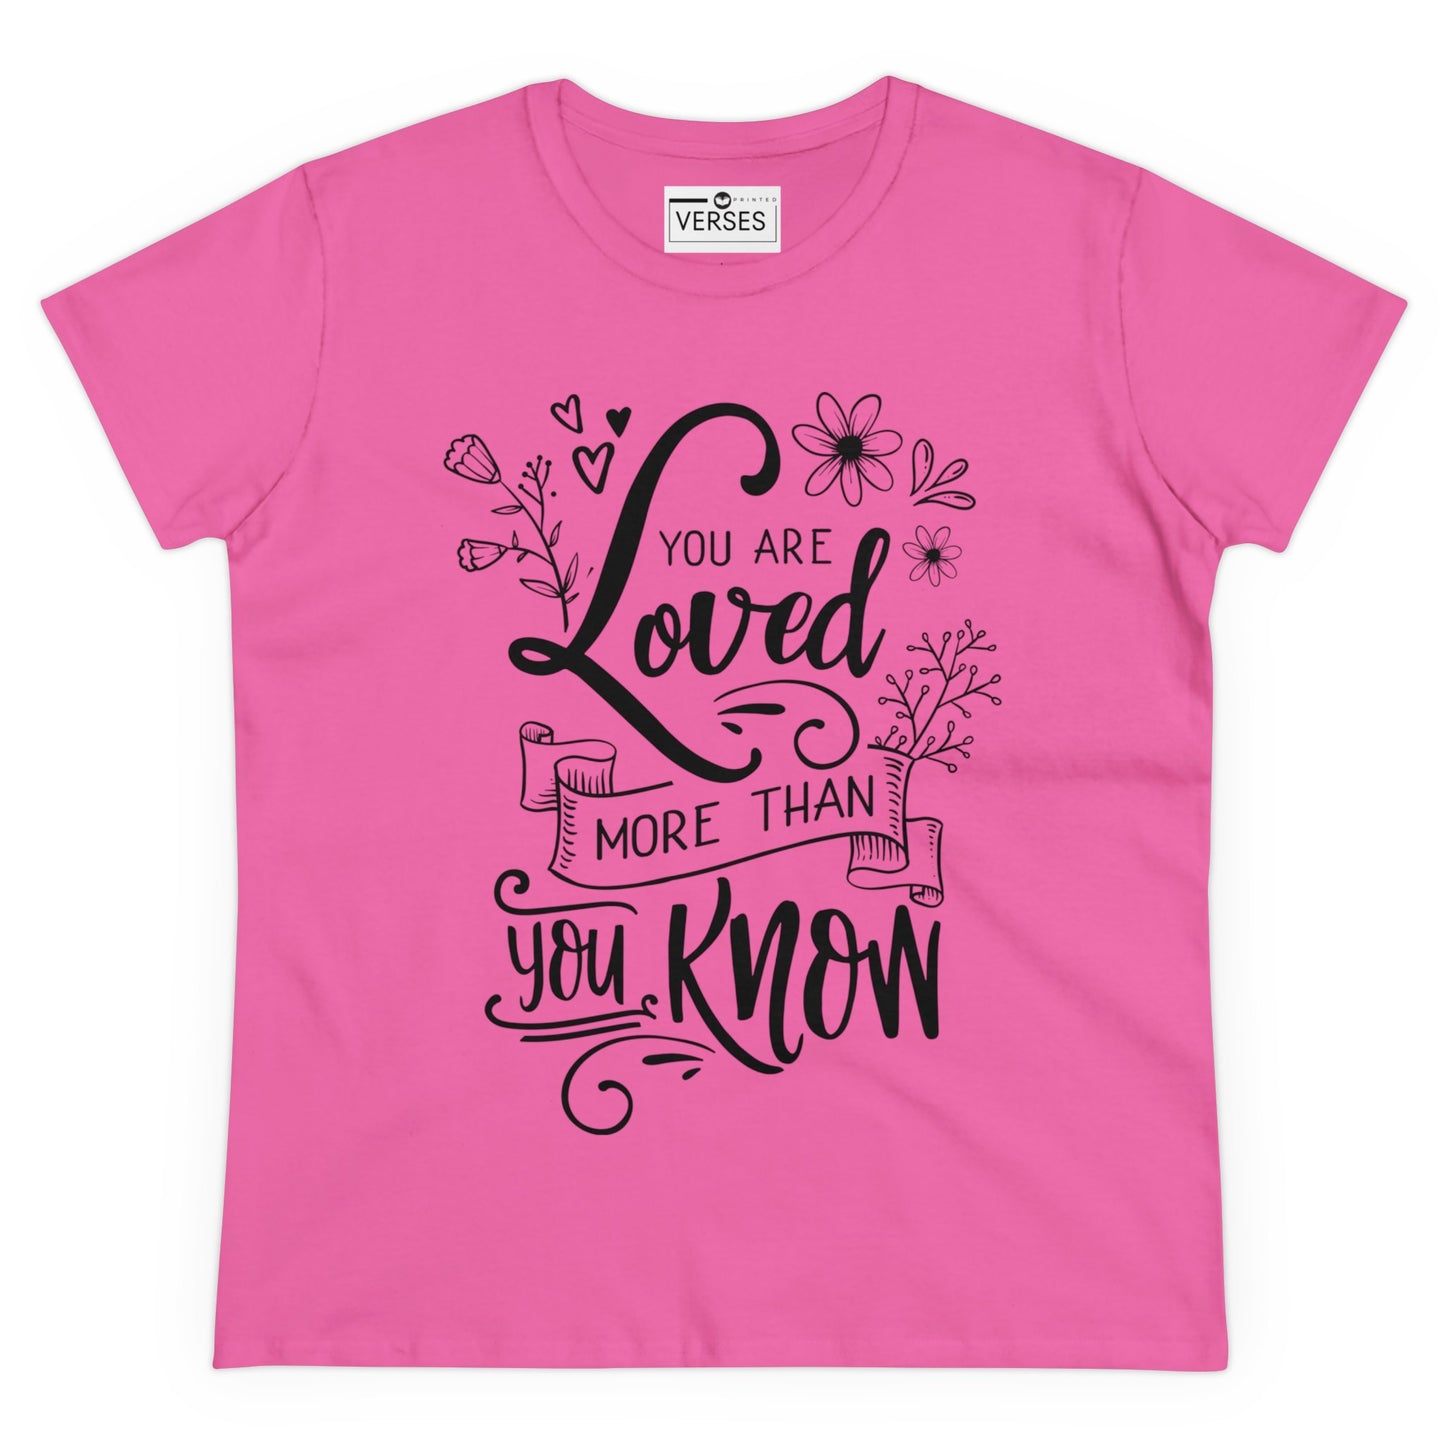 YOU ARE LOVED MORE THAN YOU KNOW -  LADIES COTTON TEE